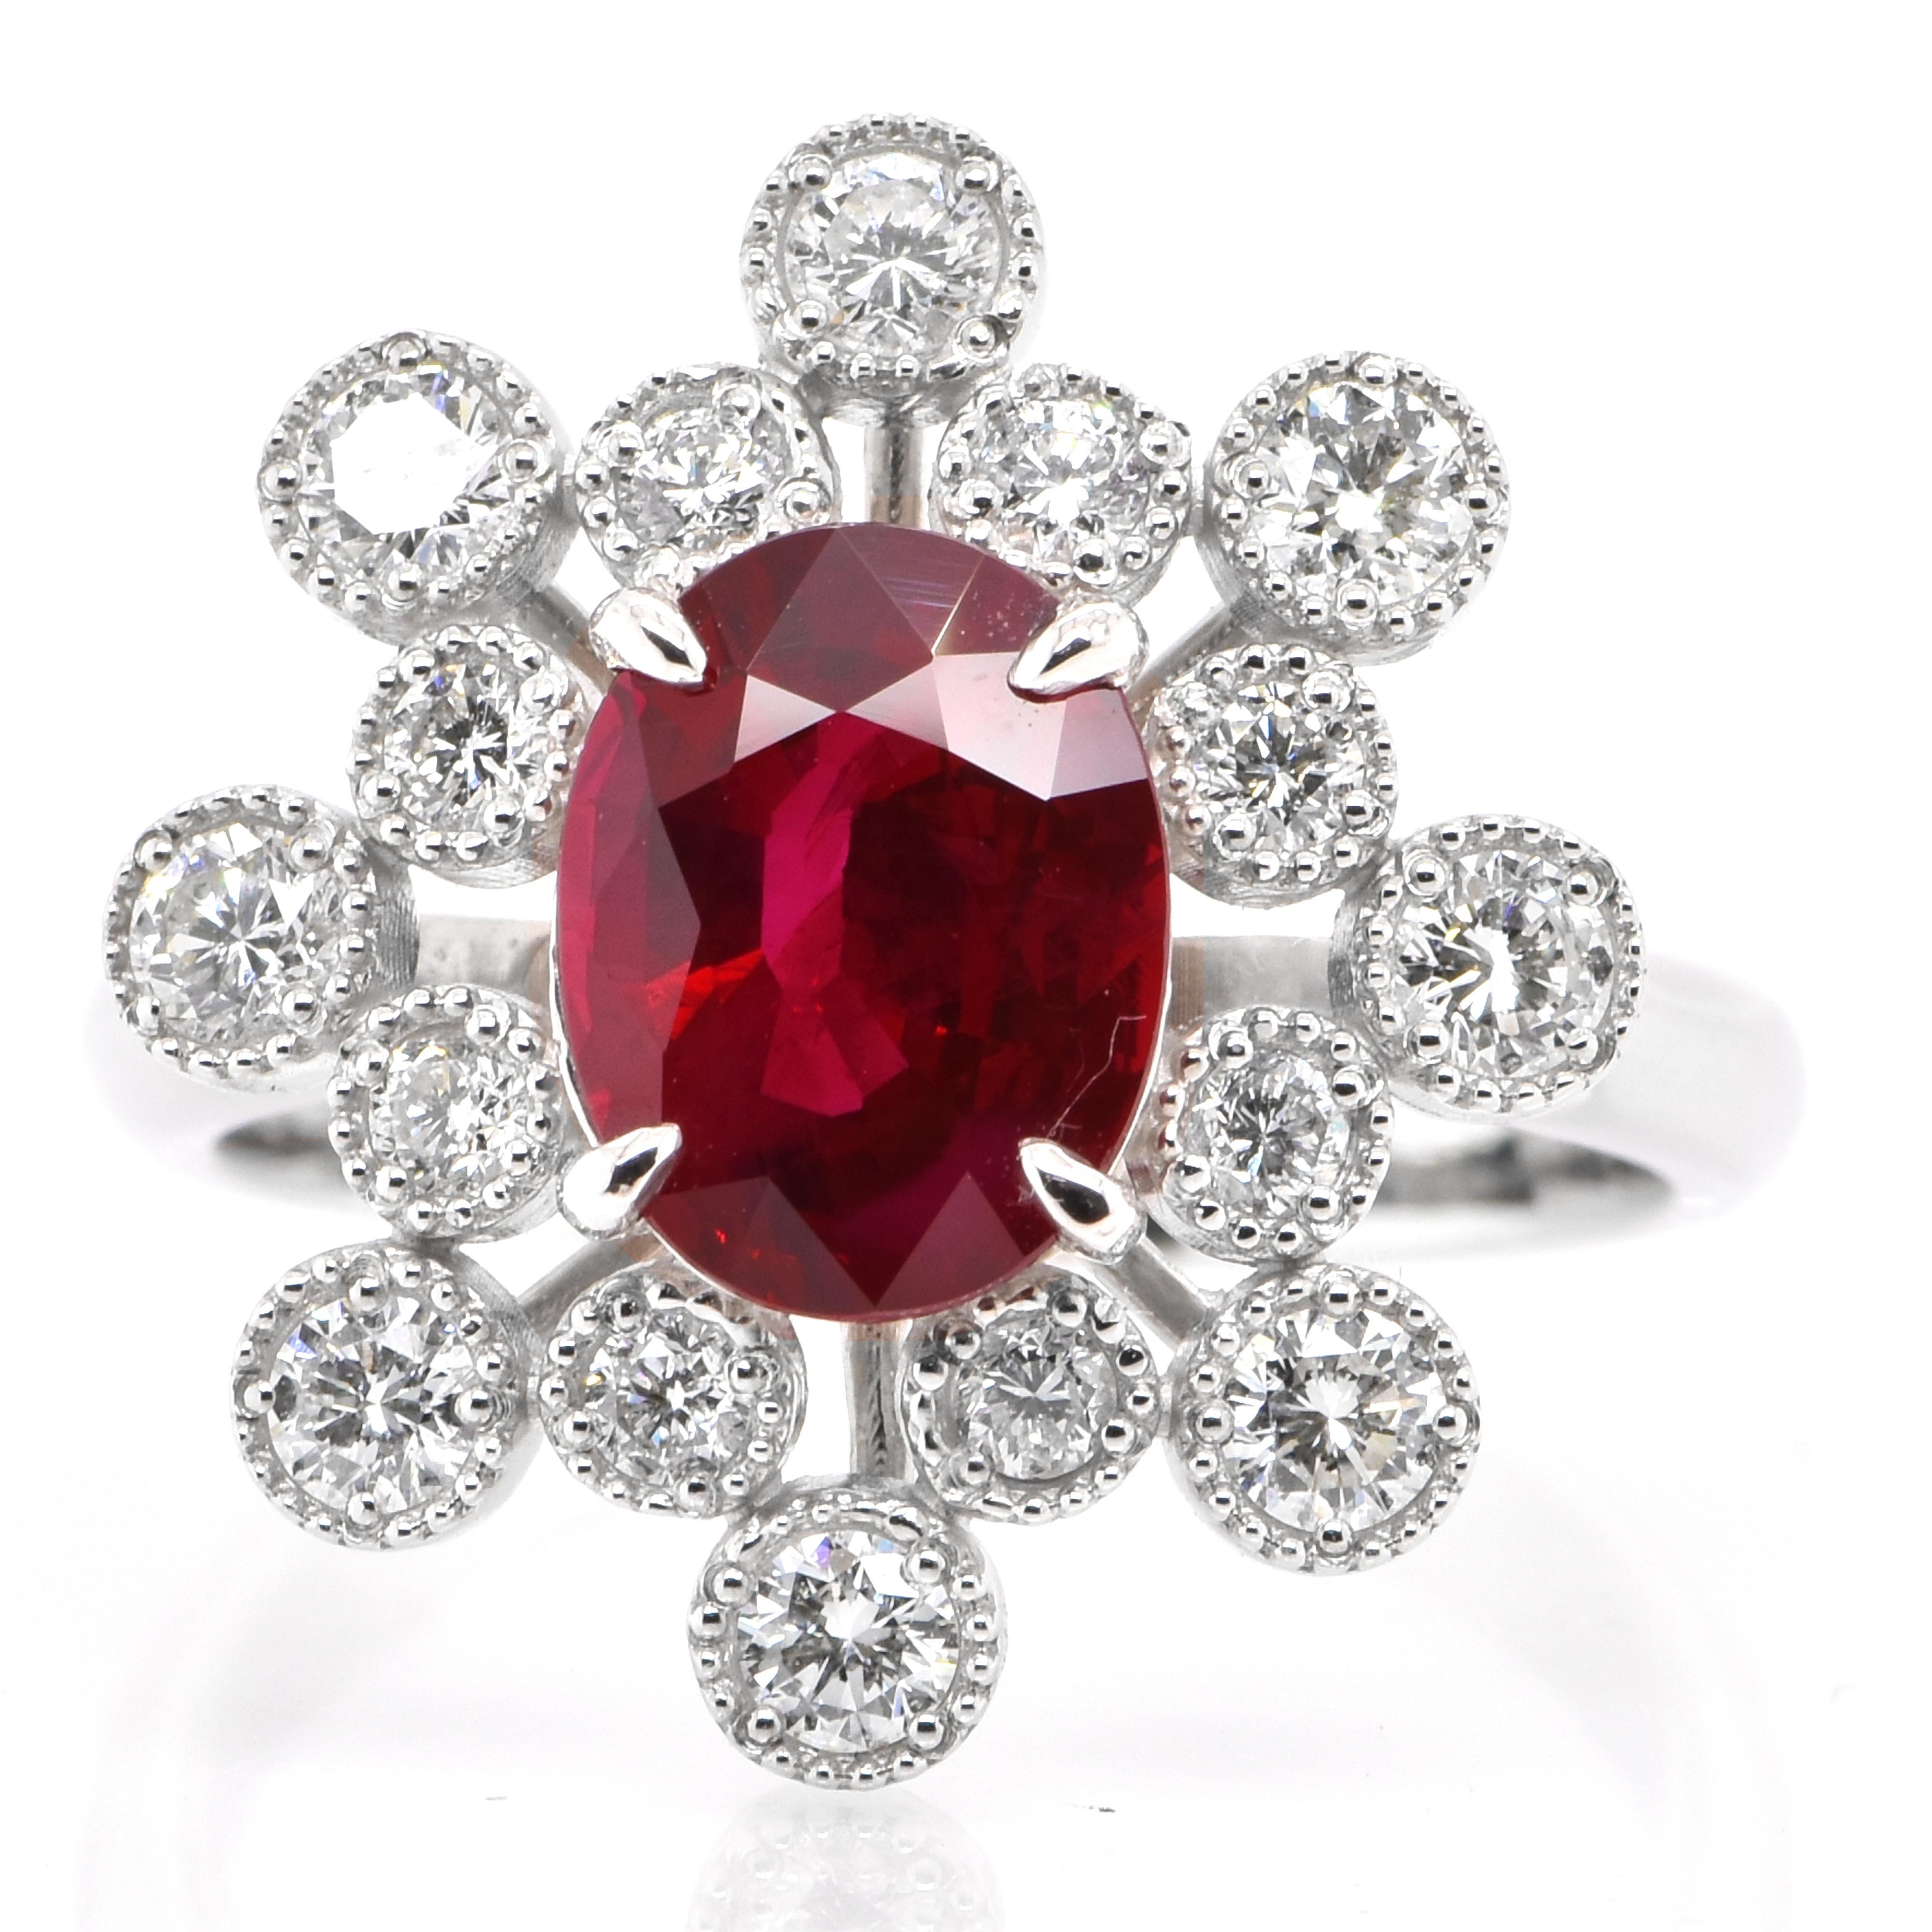 A beautiful ring set in Platinum featuring a GRS Certified 2.18 Carat Natural, Burmese, Pigeon's Blood Ruby and 0.72 Carat Diamonds. Rubies are referred to as 